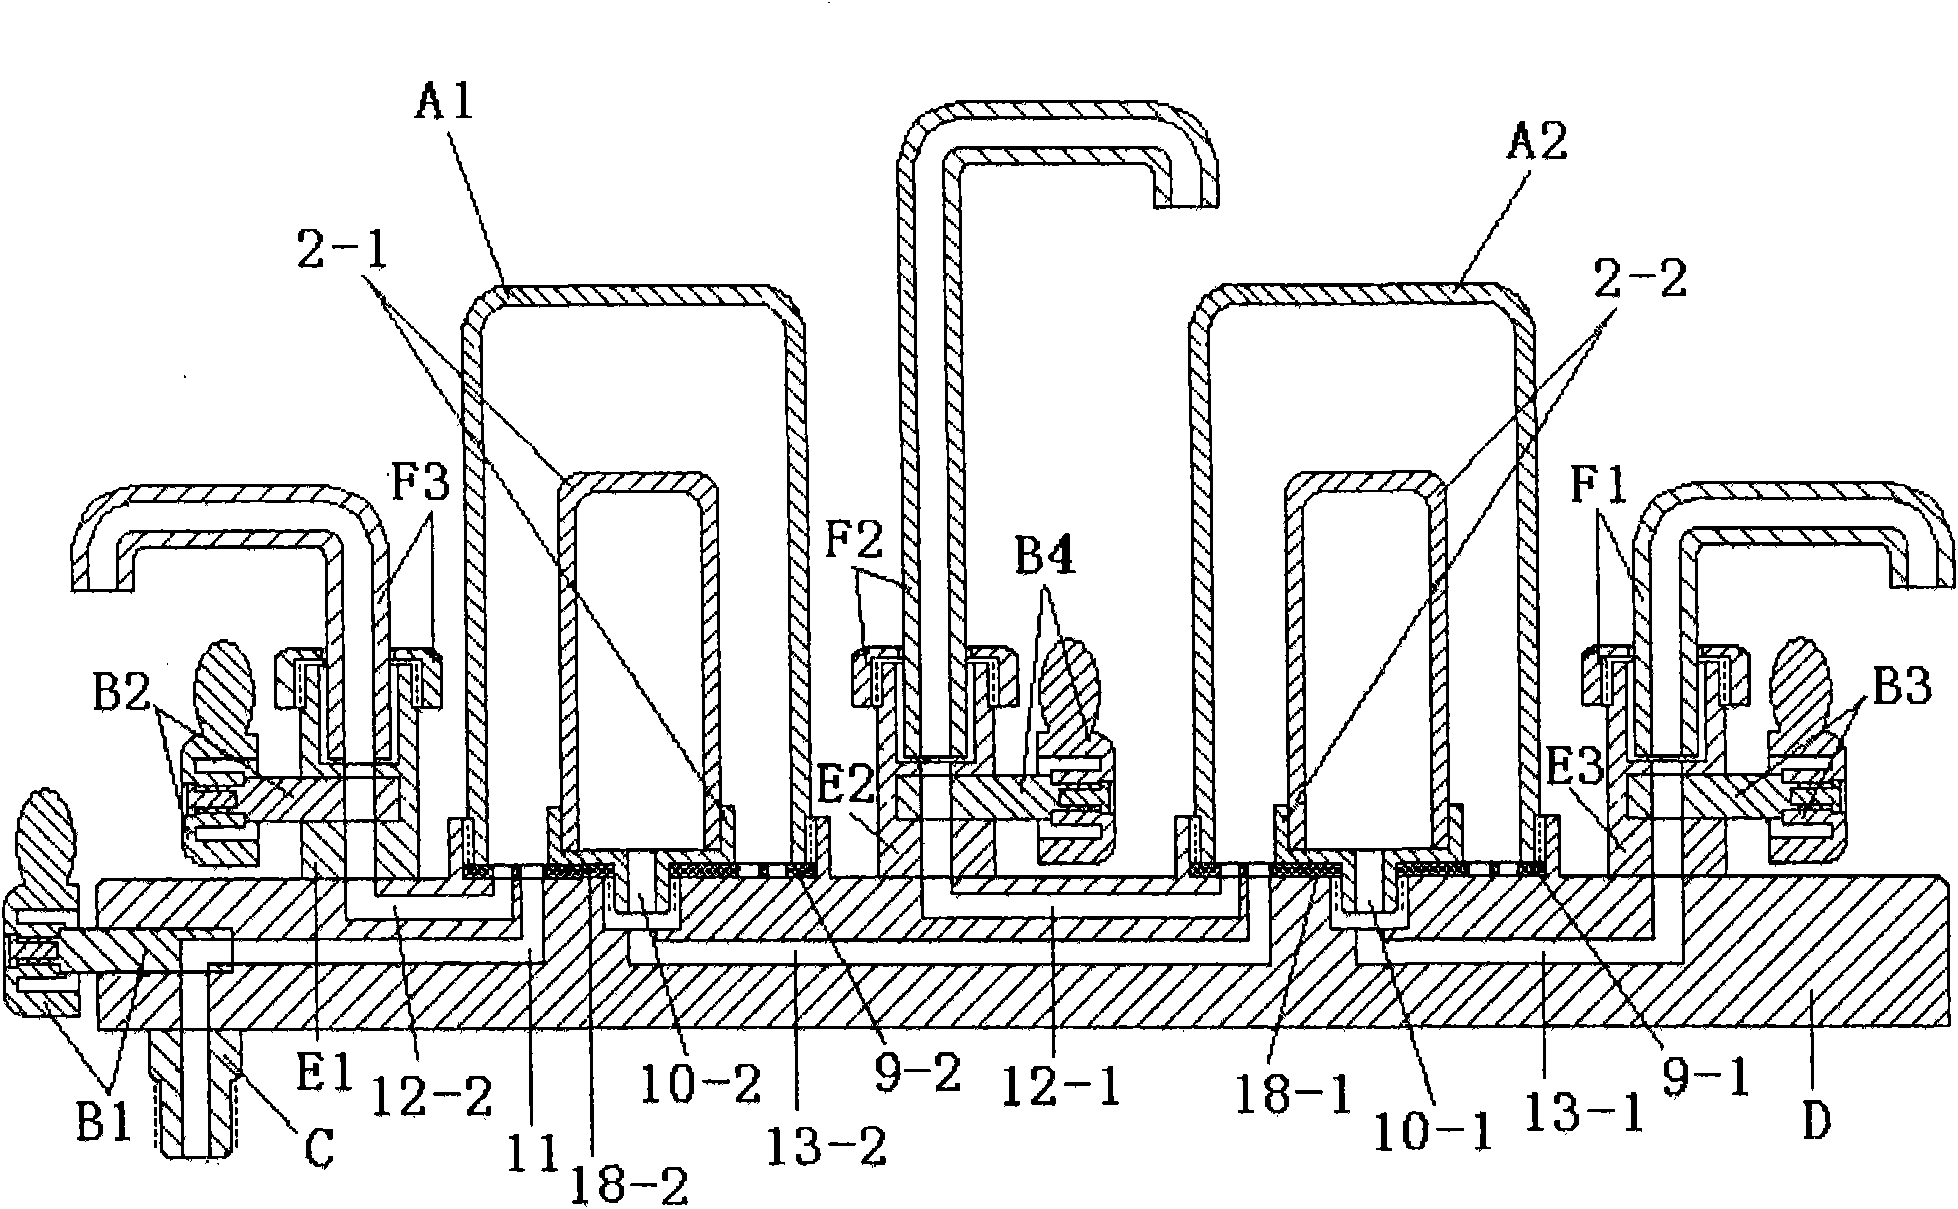 Three-tube siamesed tap with water filters